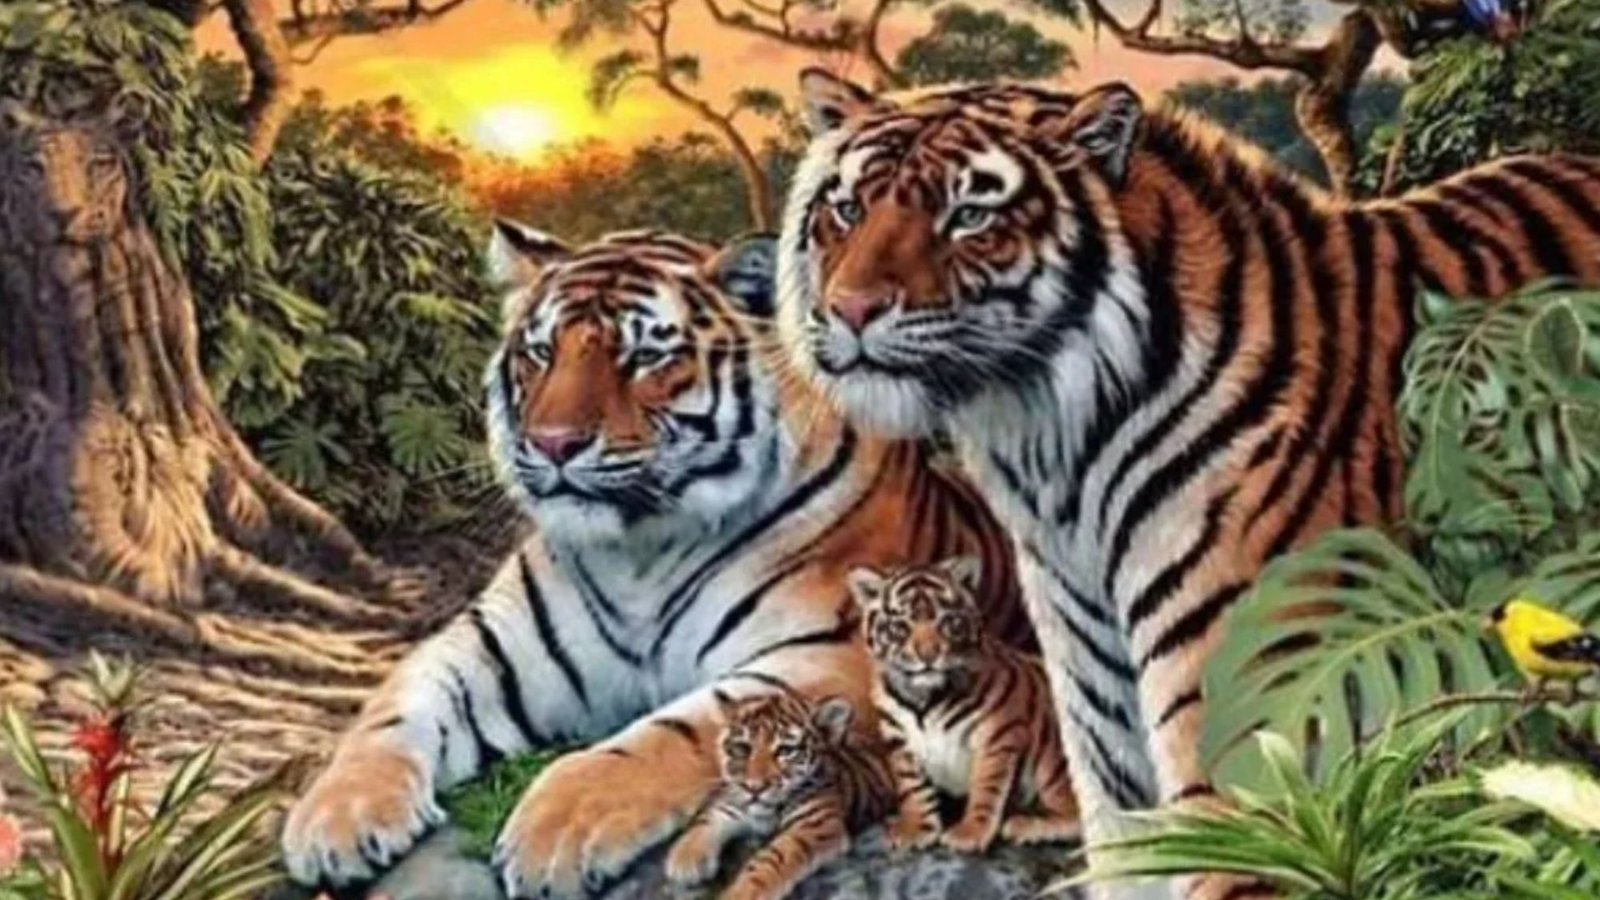 Everyone can see the tigers – but you have 20/20 vision if you can spot their 12 relatives in the illusion in 22 seconds